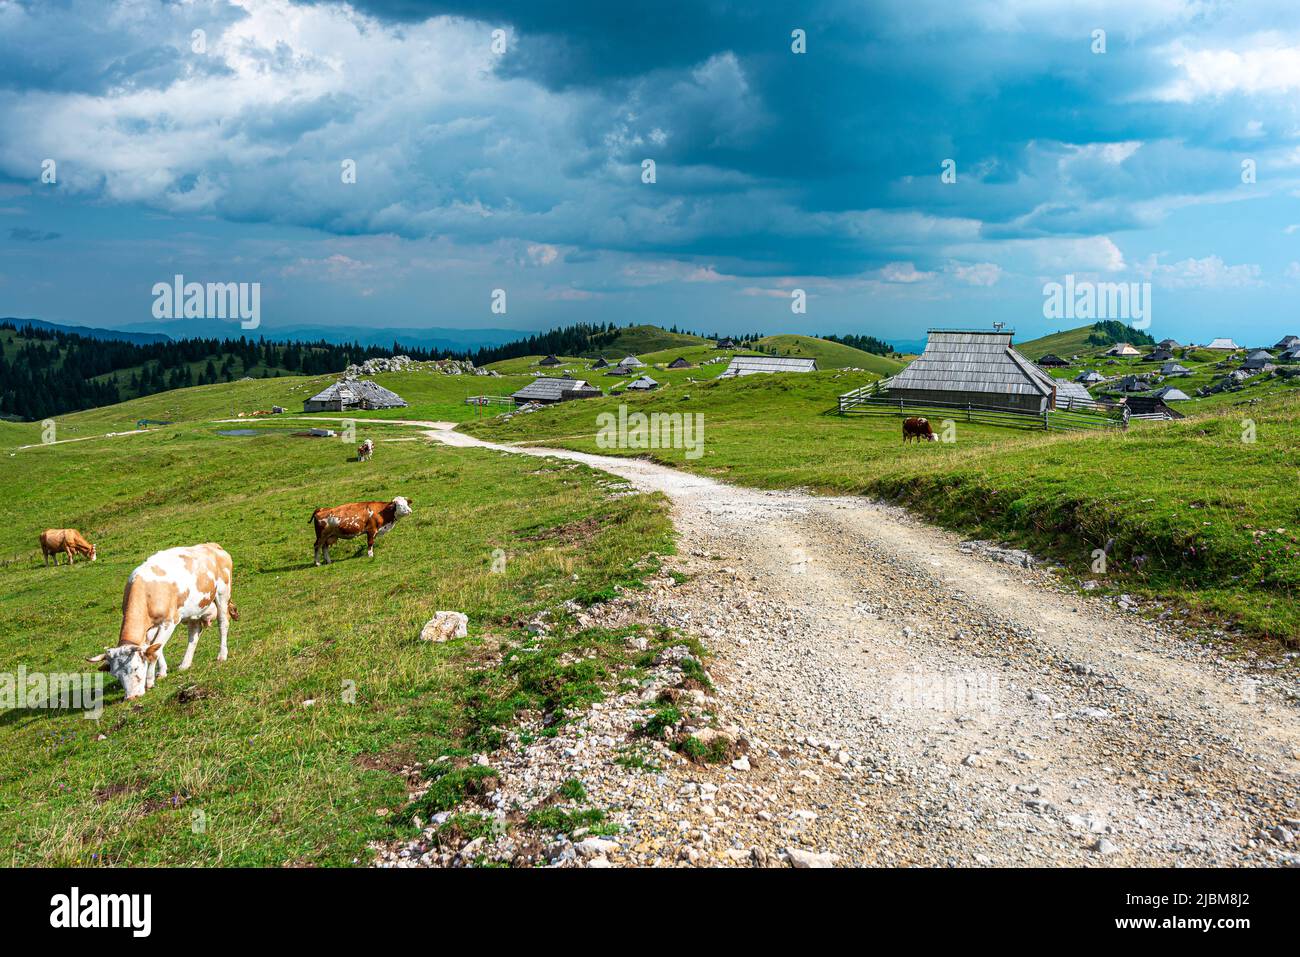 The panoramic And sunset view of sight seeing in Velika Planina, Slovenia country. Stock Photo